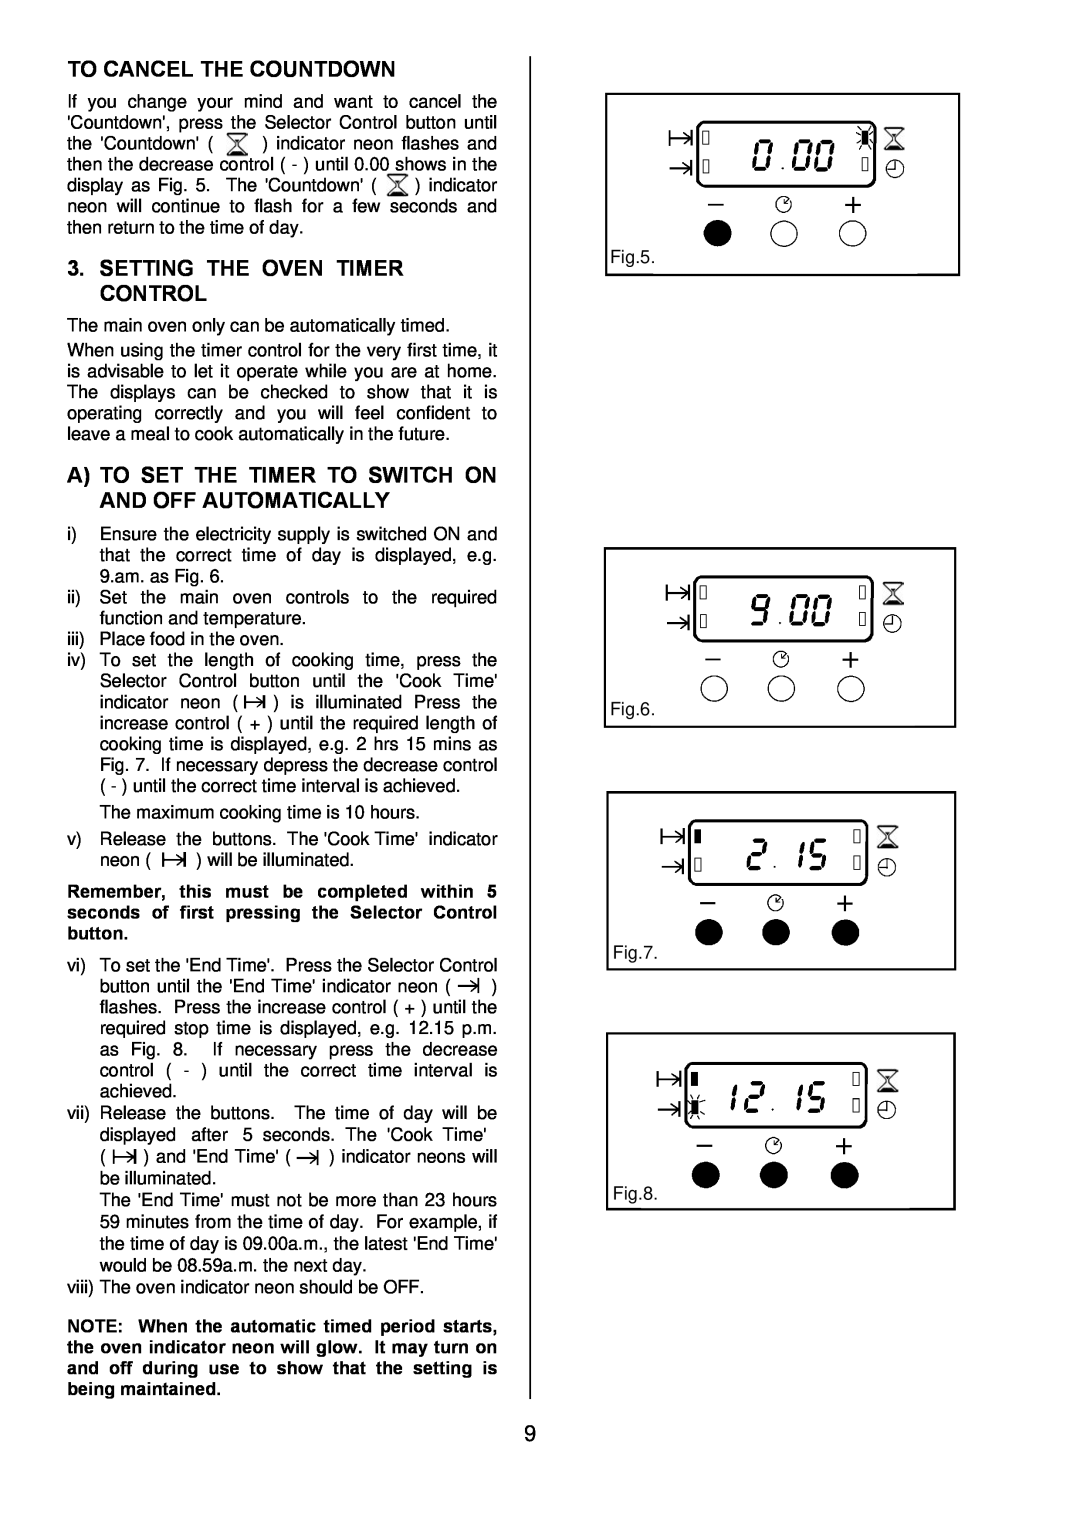 Zanussi ZUQ 875 manual To Cancel The Countdown, Setting The Oven Timer Control 